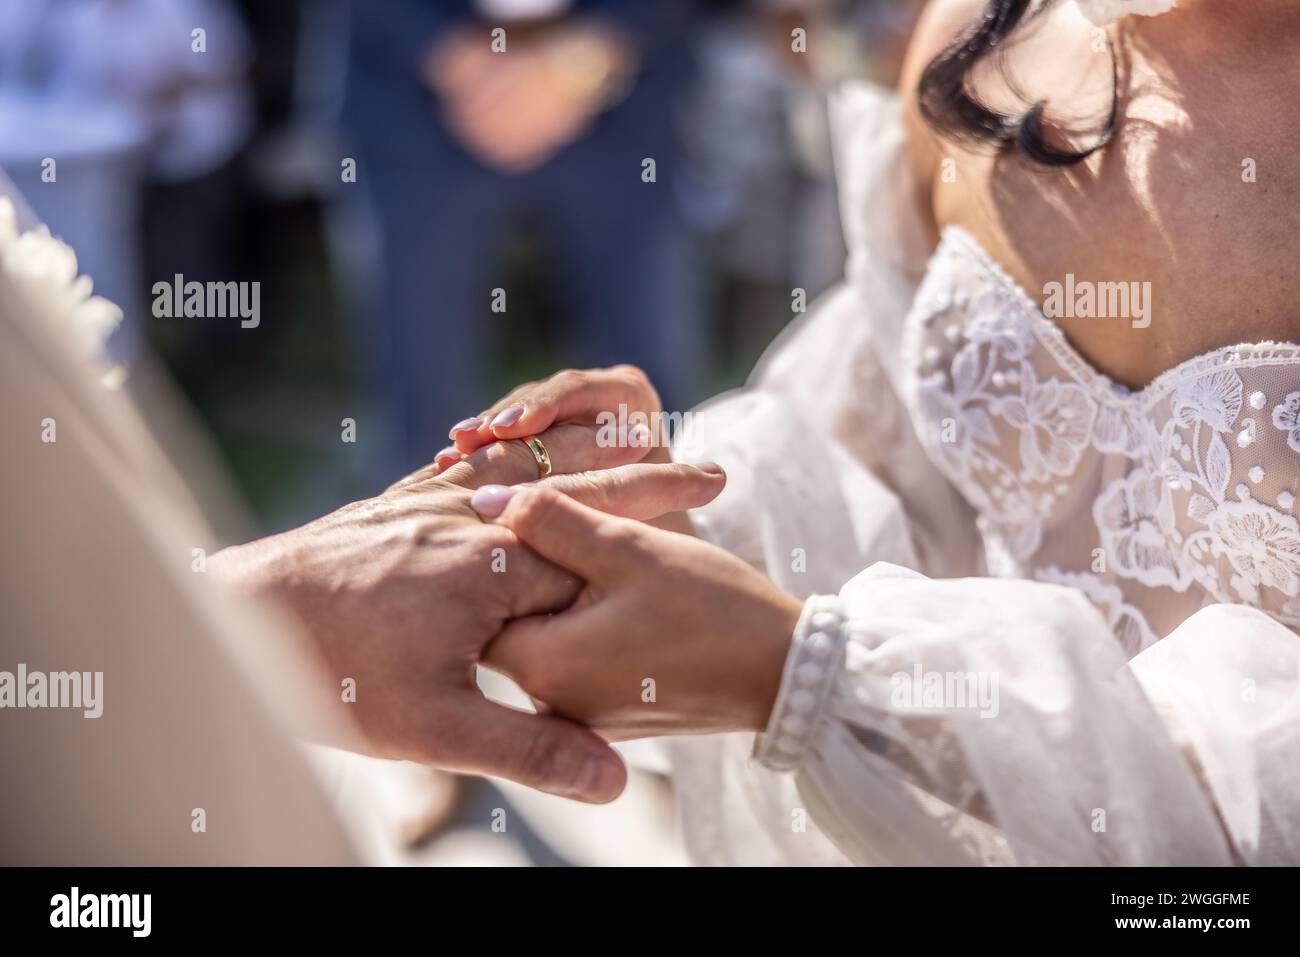 Wedding rings exchange with bride putting a ring on her future husband's finger. Stock Photo